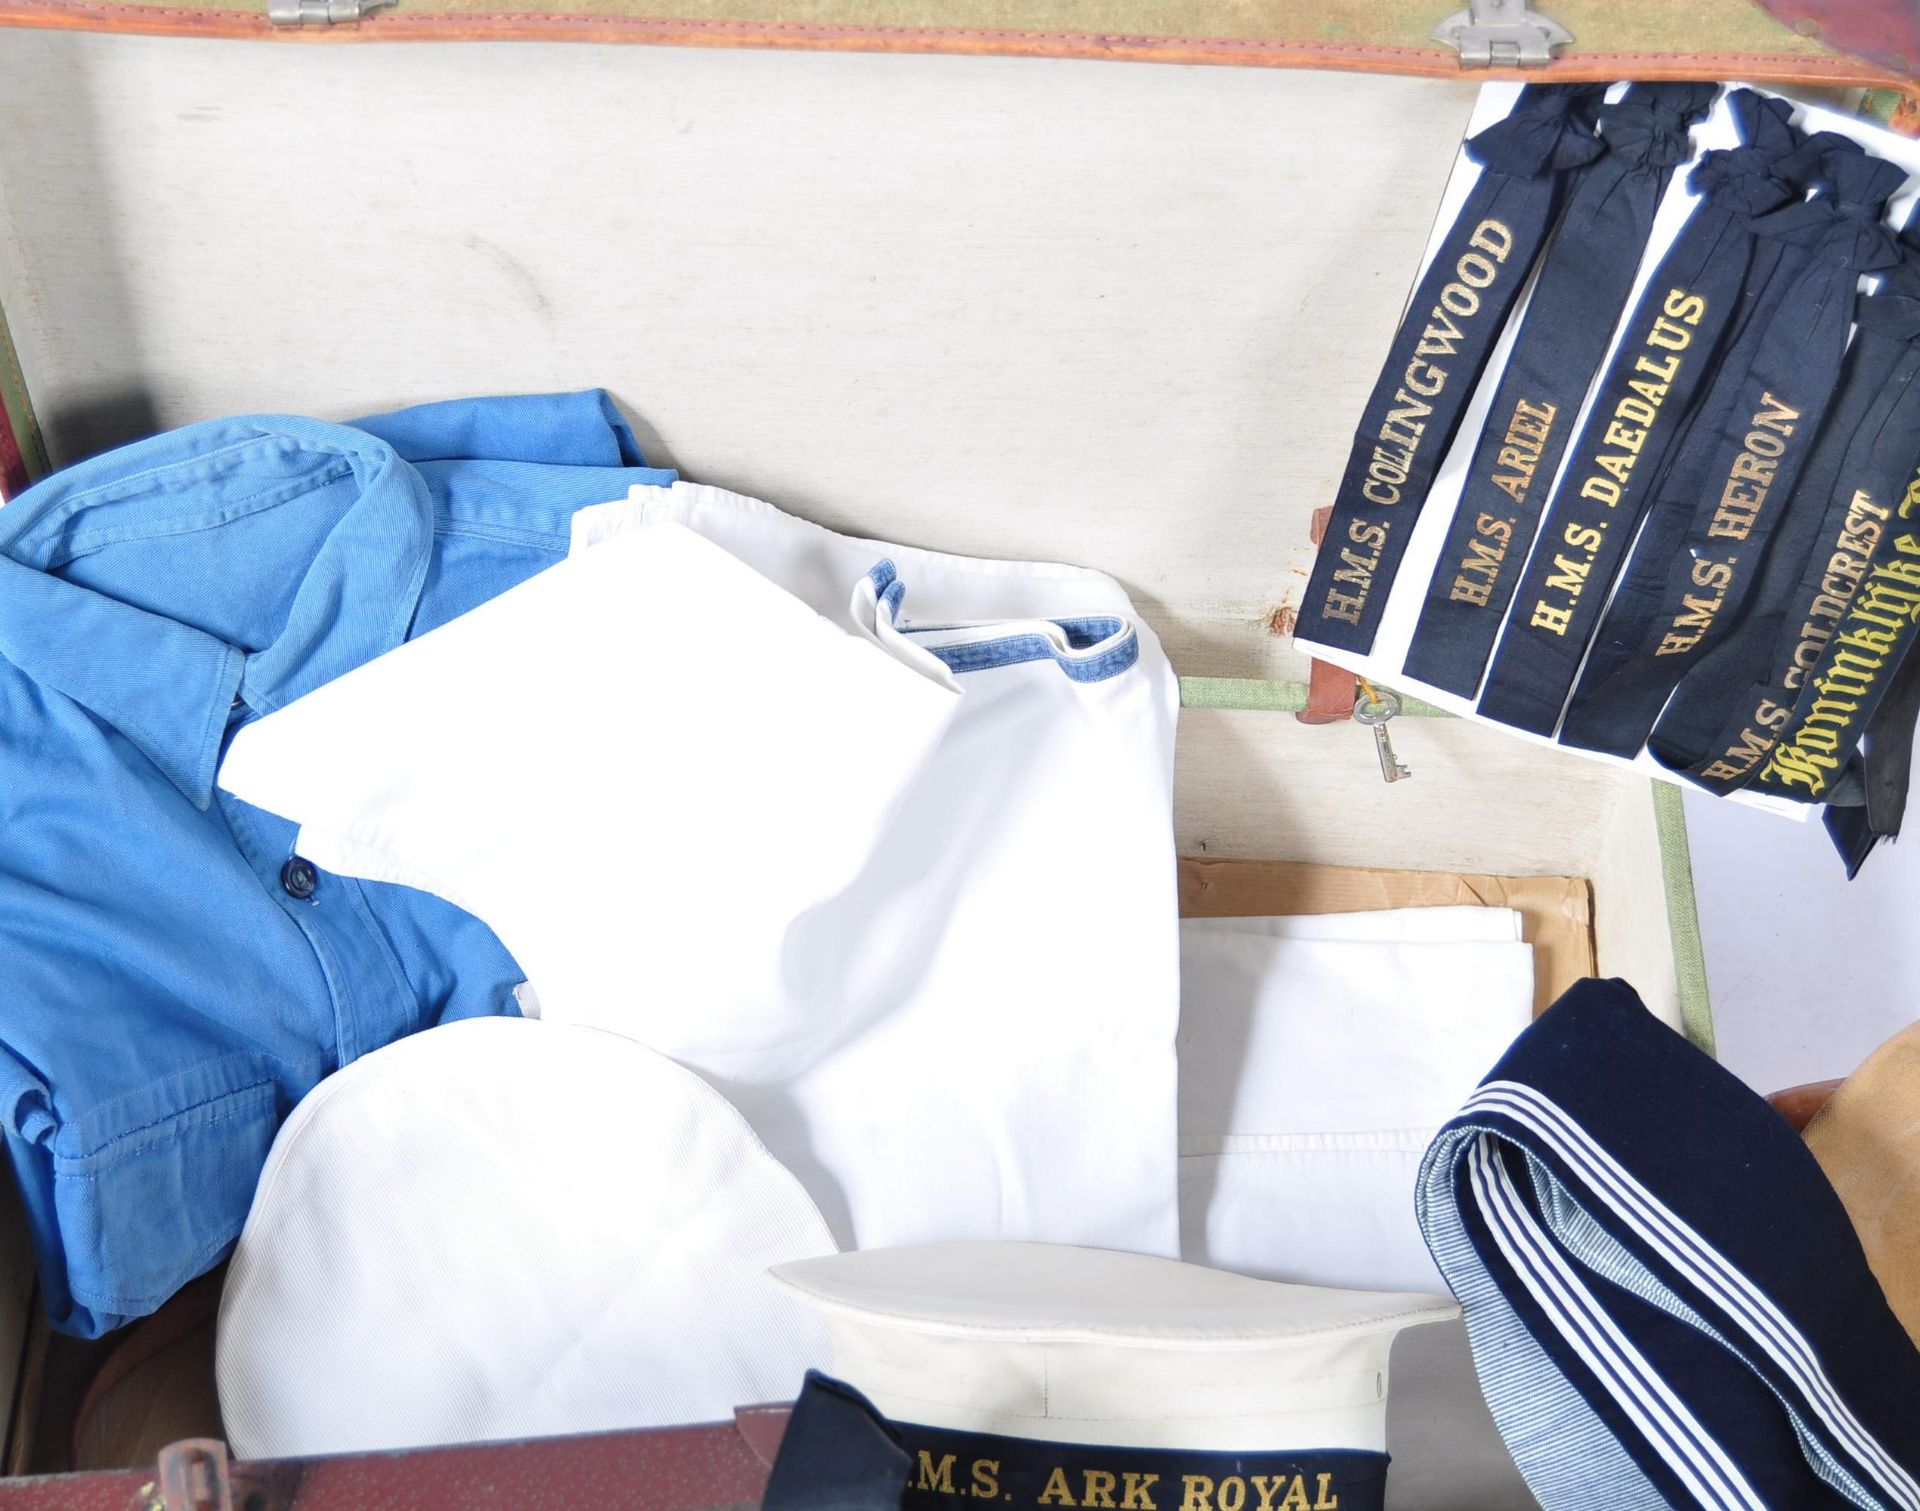 COLLECTION OF ROYAL NAVY UNIFORM ITEMS AND PERSONAL BELONGINGS - Image 6 of 9